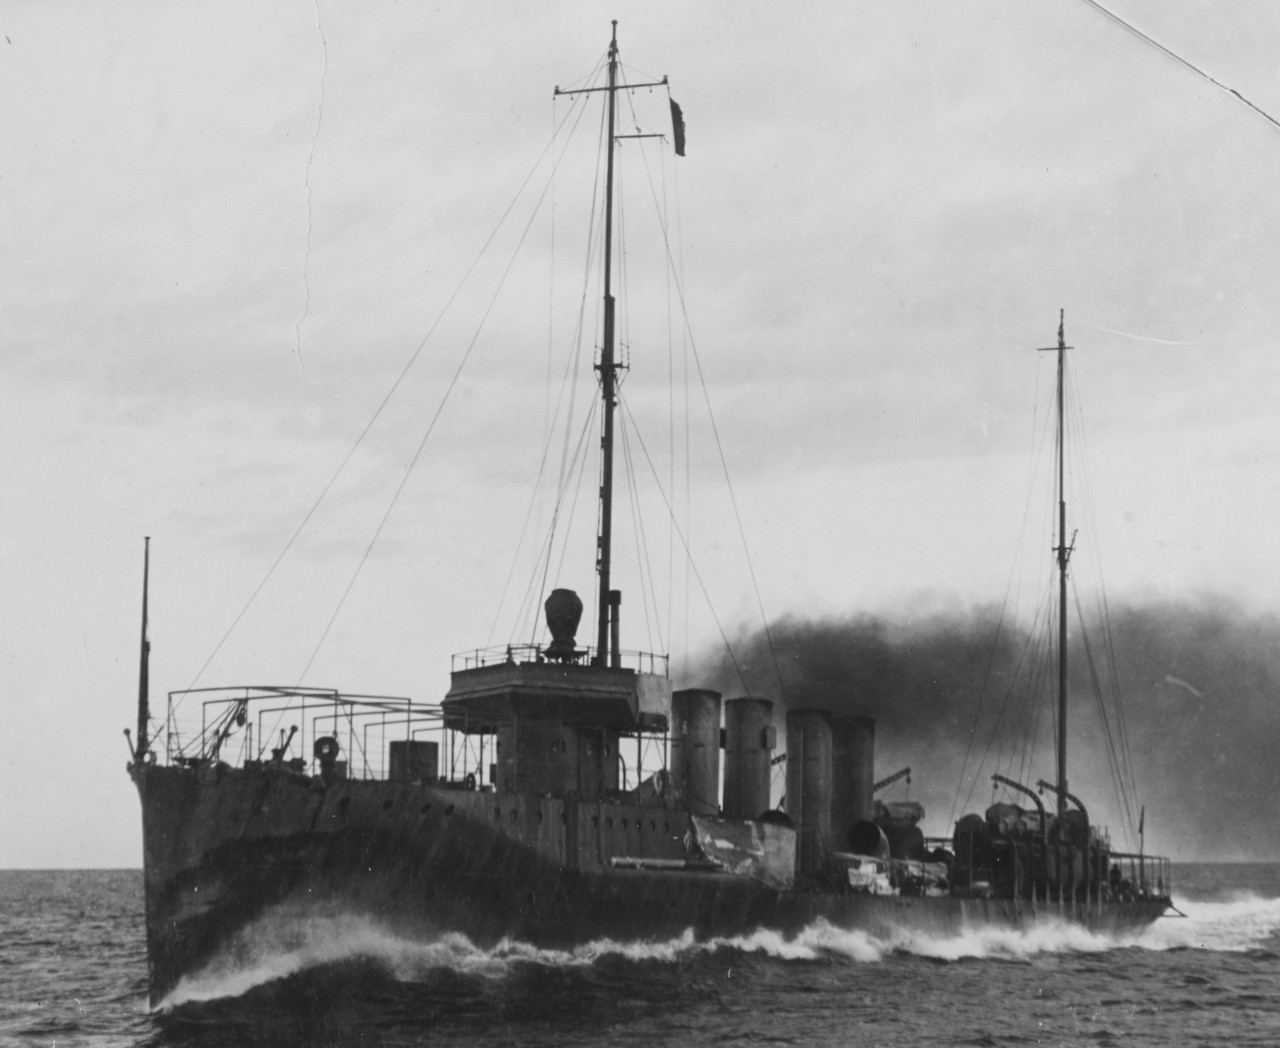 Tucker running trials, making 30.03 knots, 19 March 1916. At this point, less than a month prior to her being commissioned, she has not received her armament, and weights have been installed in place of her guns. (Naval History and Heritage Command Photograph NH 49805)